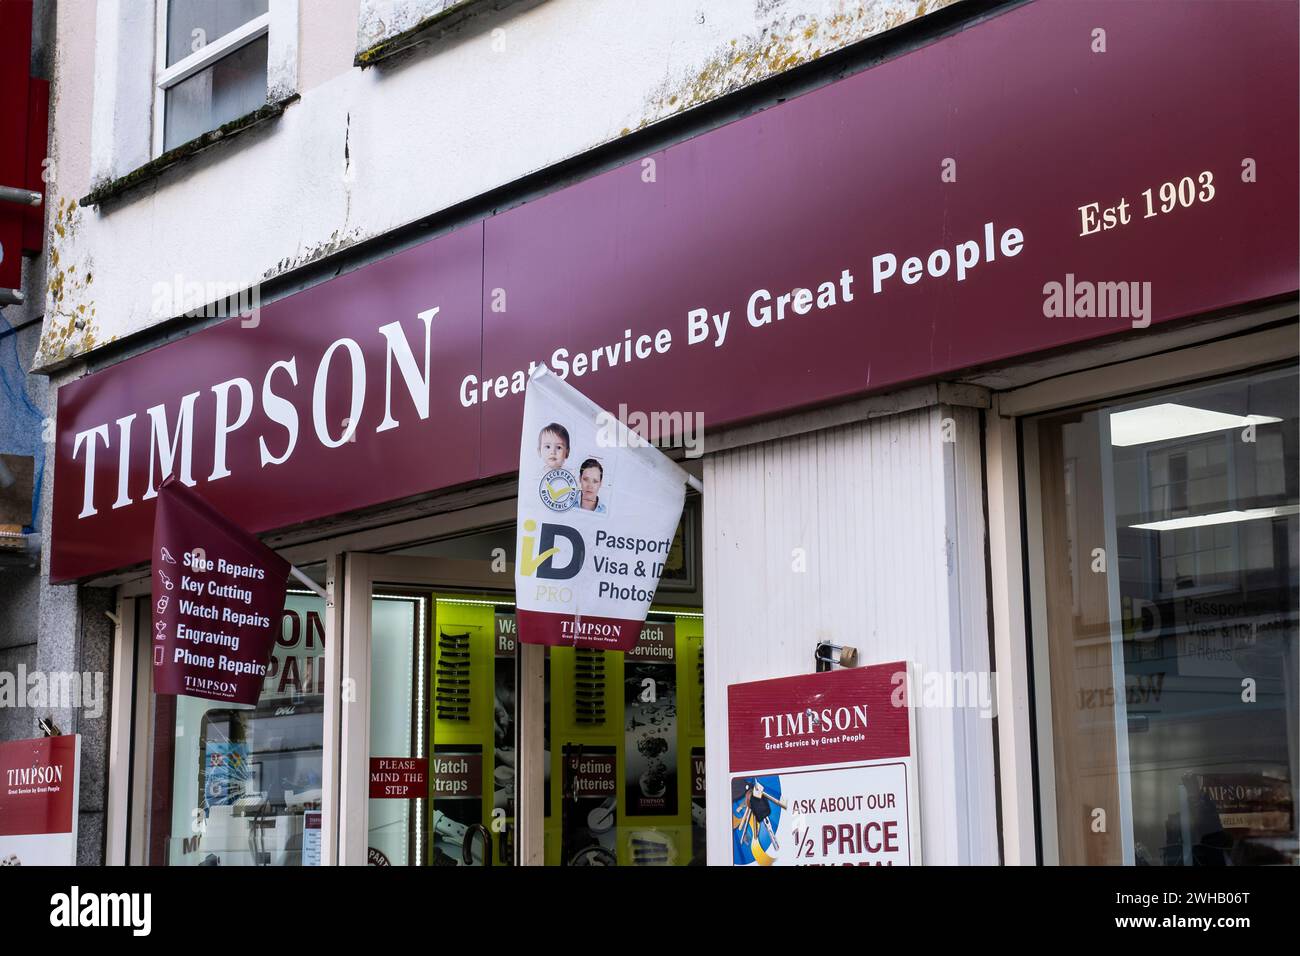 A shop sign for Timpsons in Truro City centre in Cornwall, UK Stock Photo